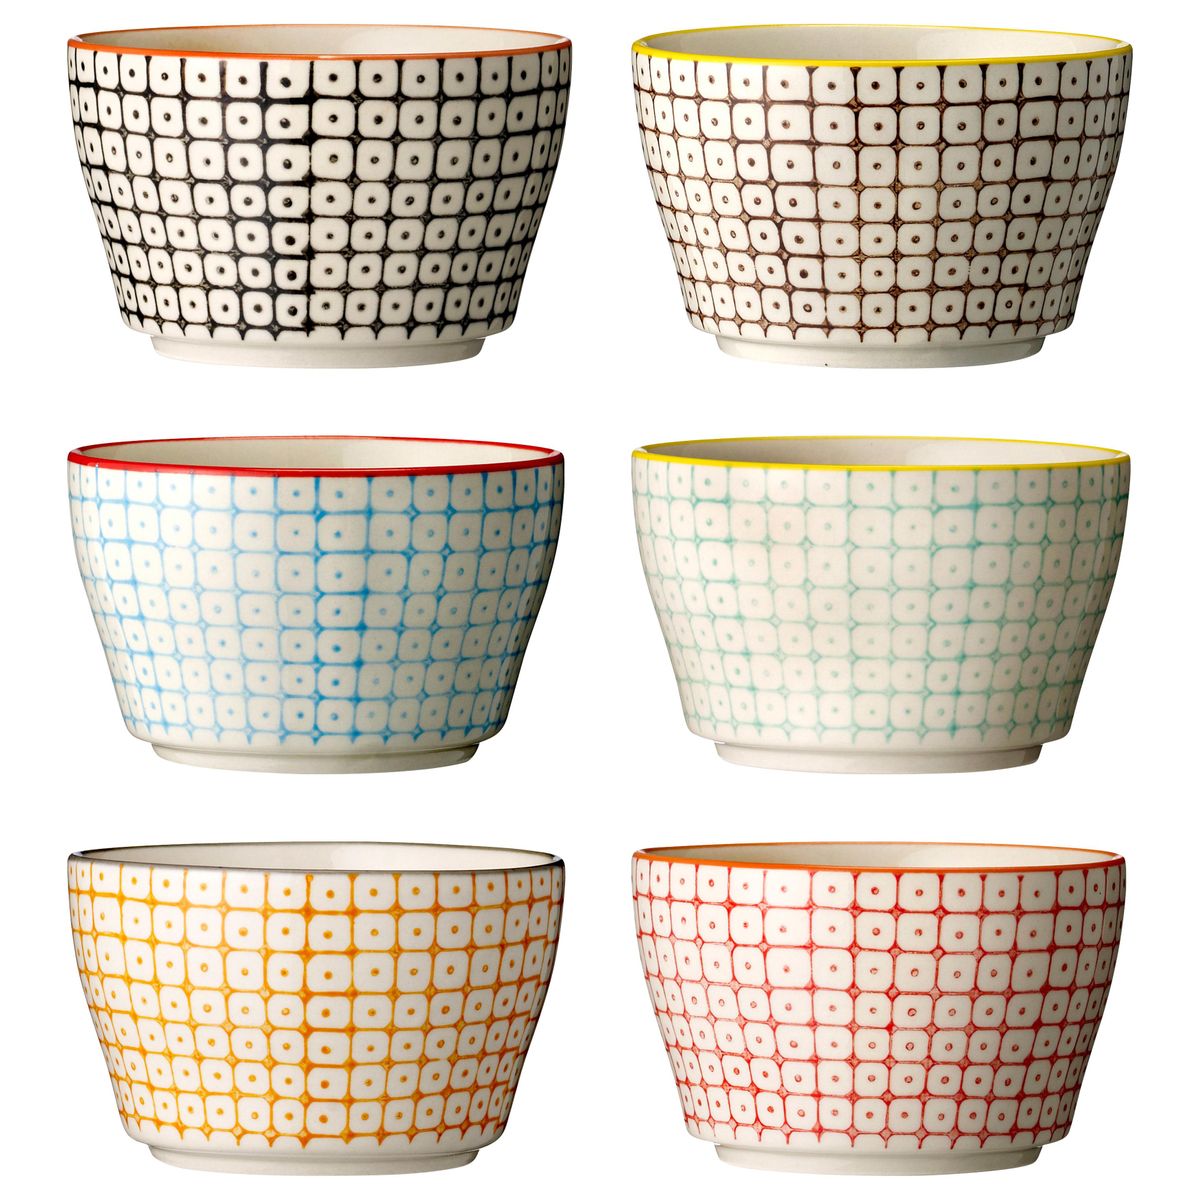 Using different colored bowls helps slumber party guests keep track of which popcorn is there. (Joss & Main)